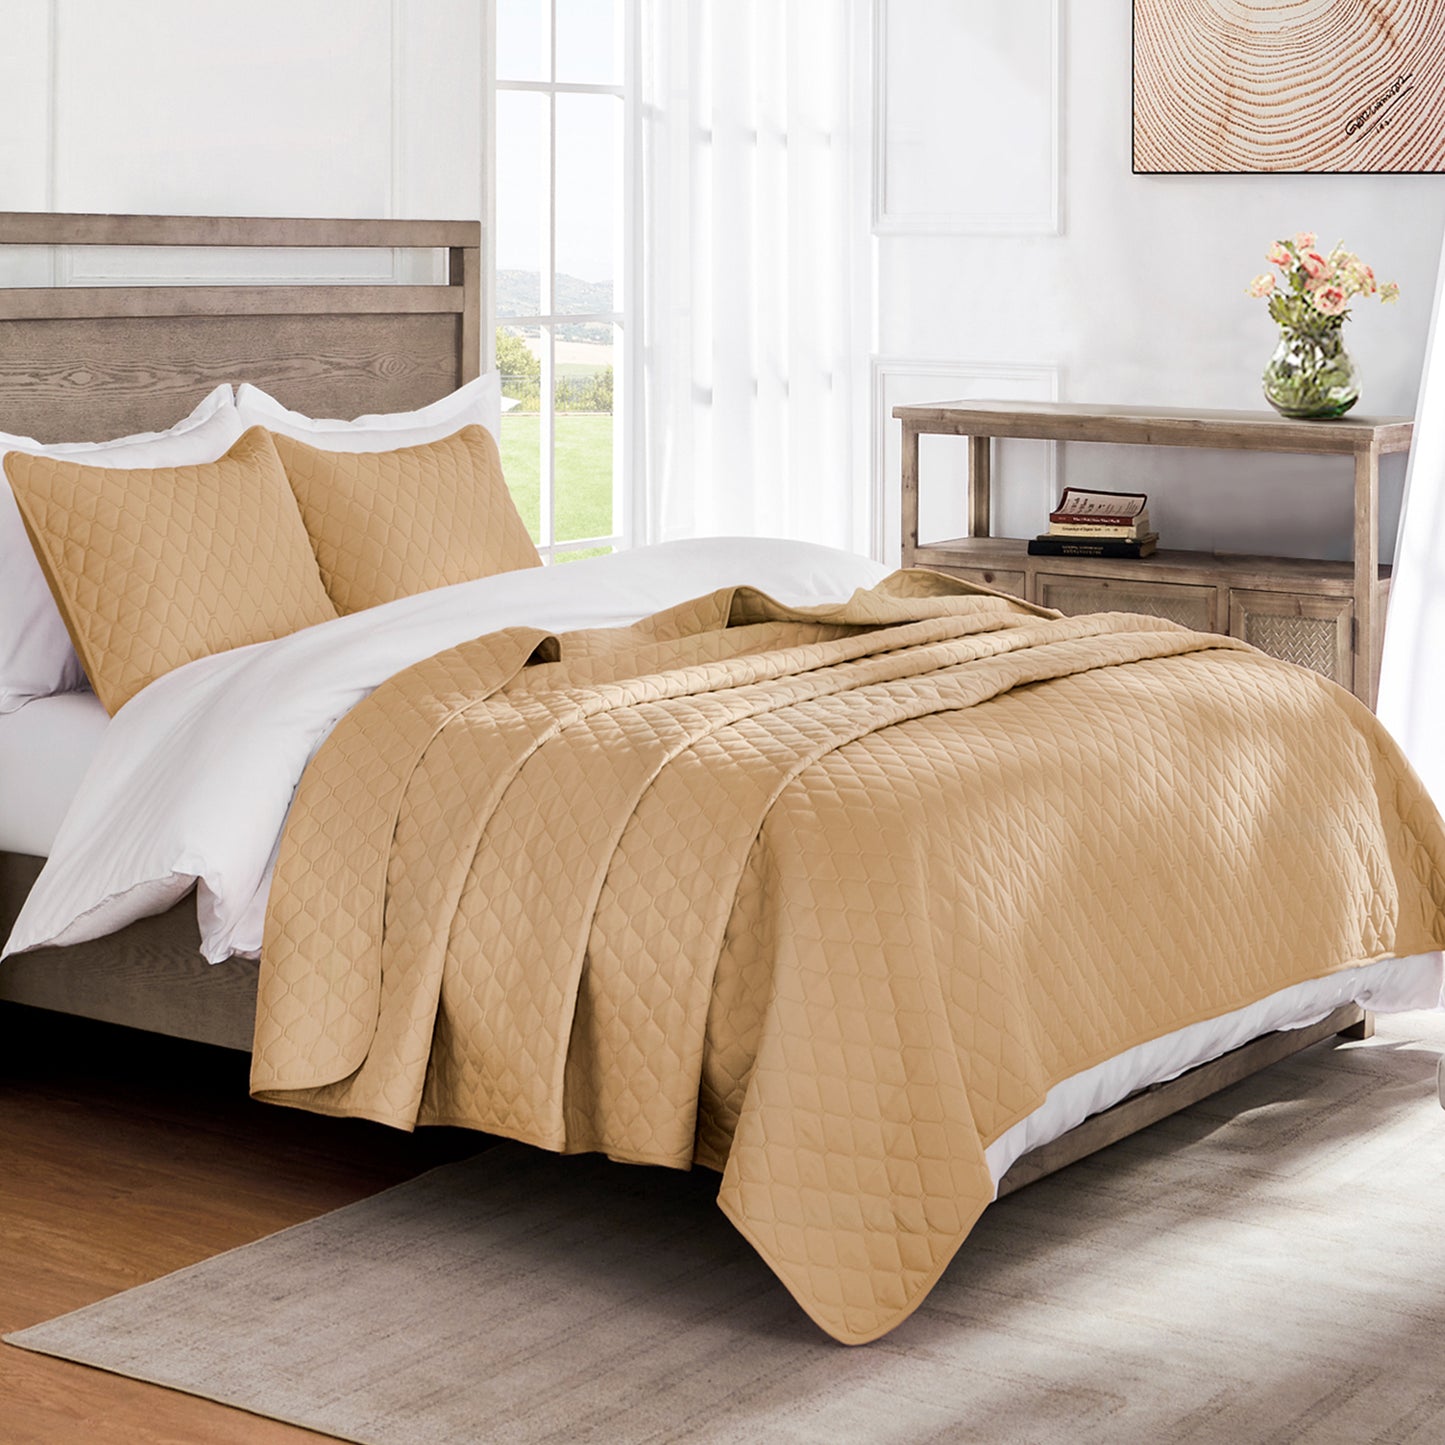 Exclusivo Mezcla California King Quilt Bedding Set with Pillow Shams, Lightweight Quilts Cal Oversized King Size, Soft Bedspreads Bed Coverlets for All Seasons - (Camel, 112"x104")